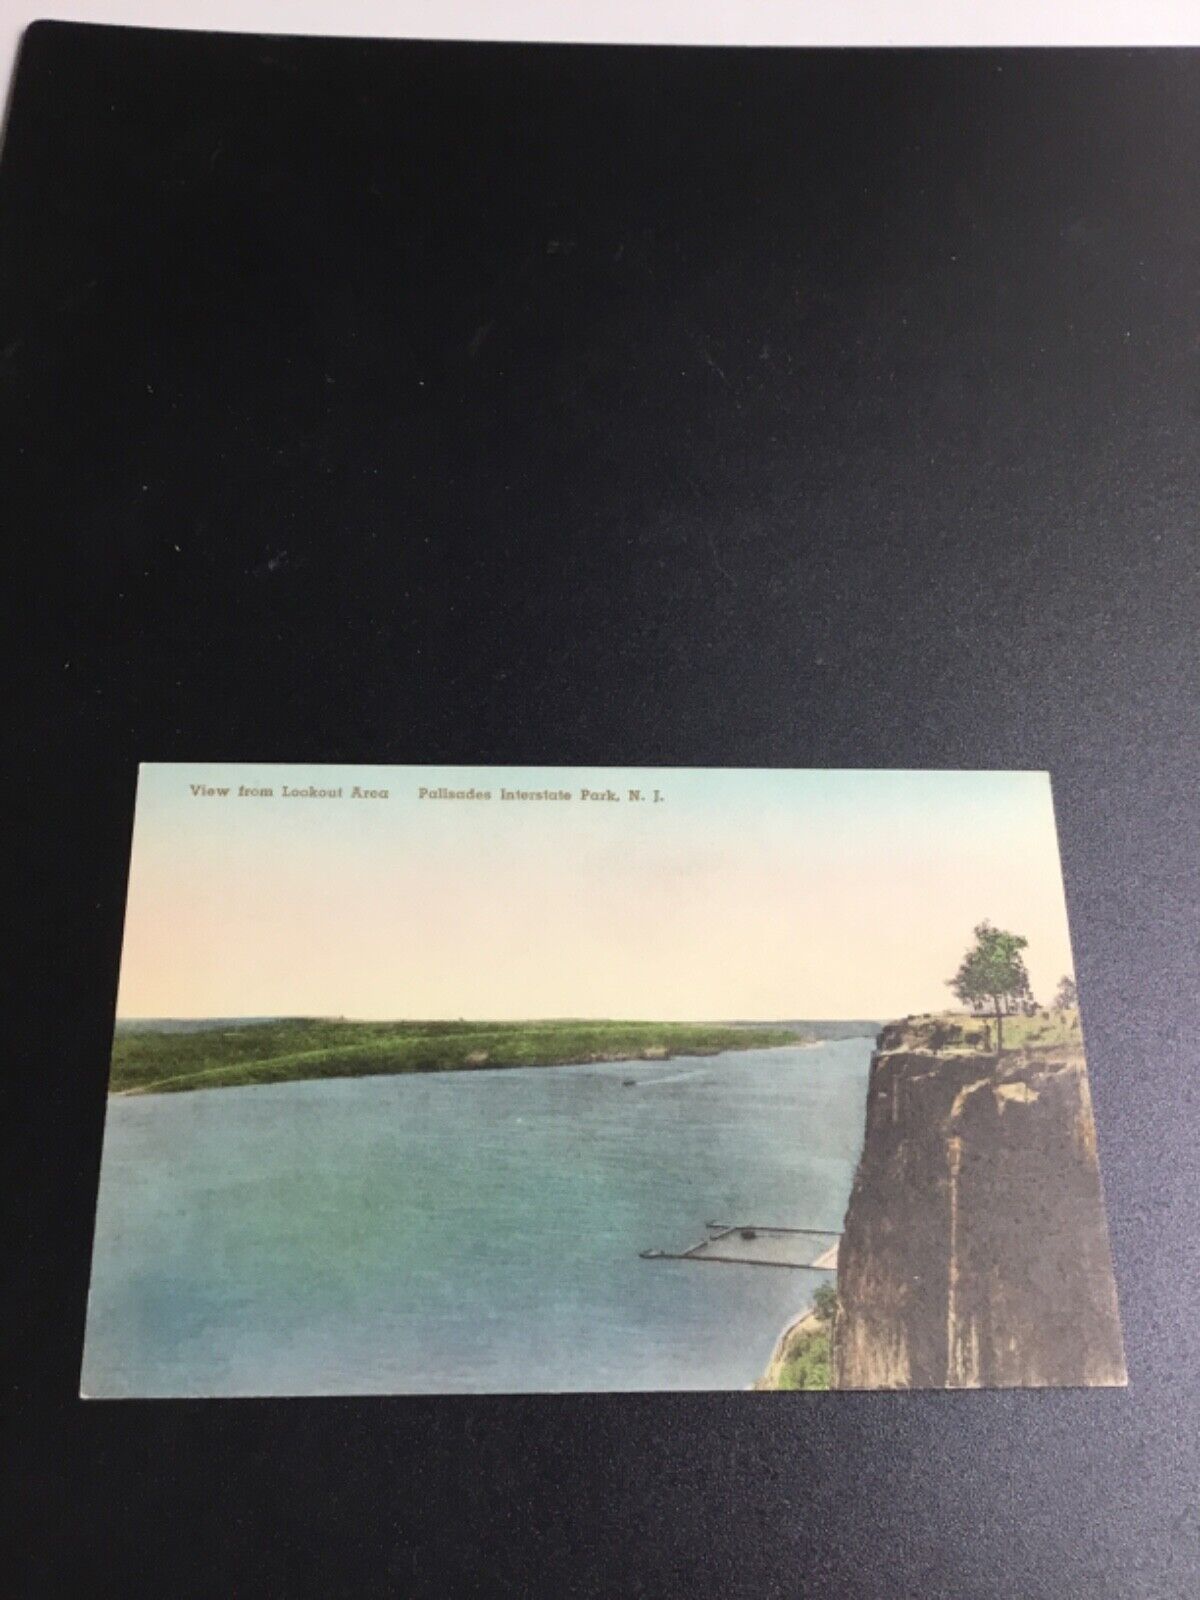 Palisades Interstate Park, NJ Postcard - View from Lookout Area 2548